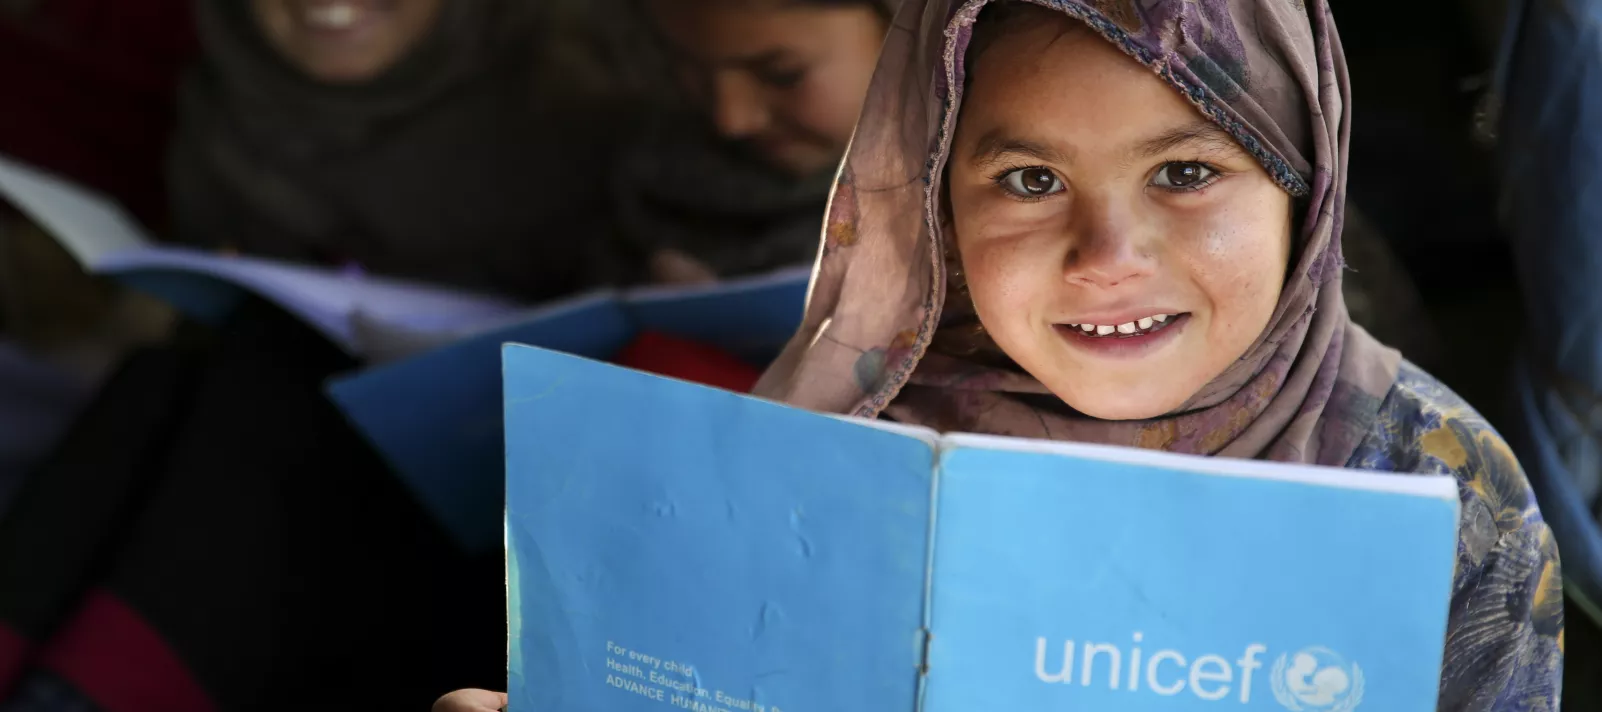 Muharra attends her class in UNICEF supported school in Jalozai camp, KPK